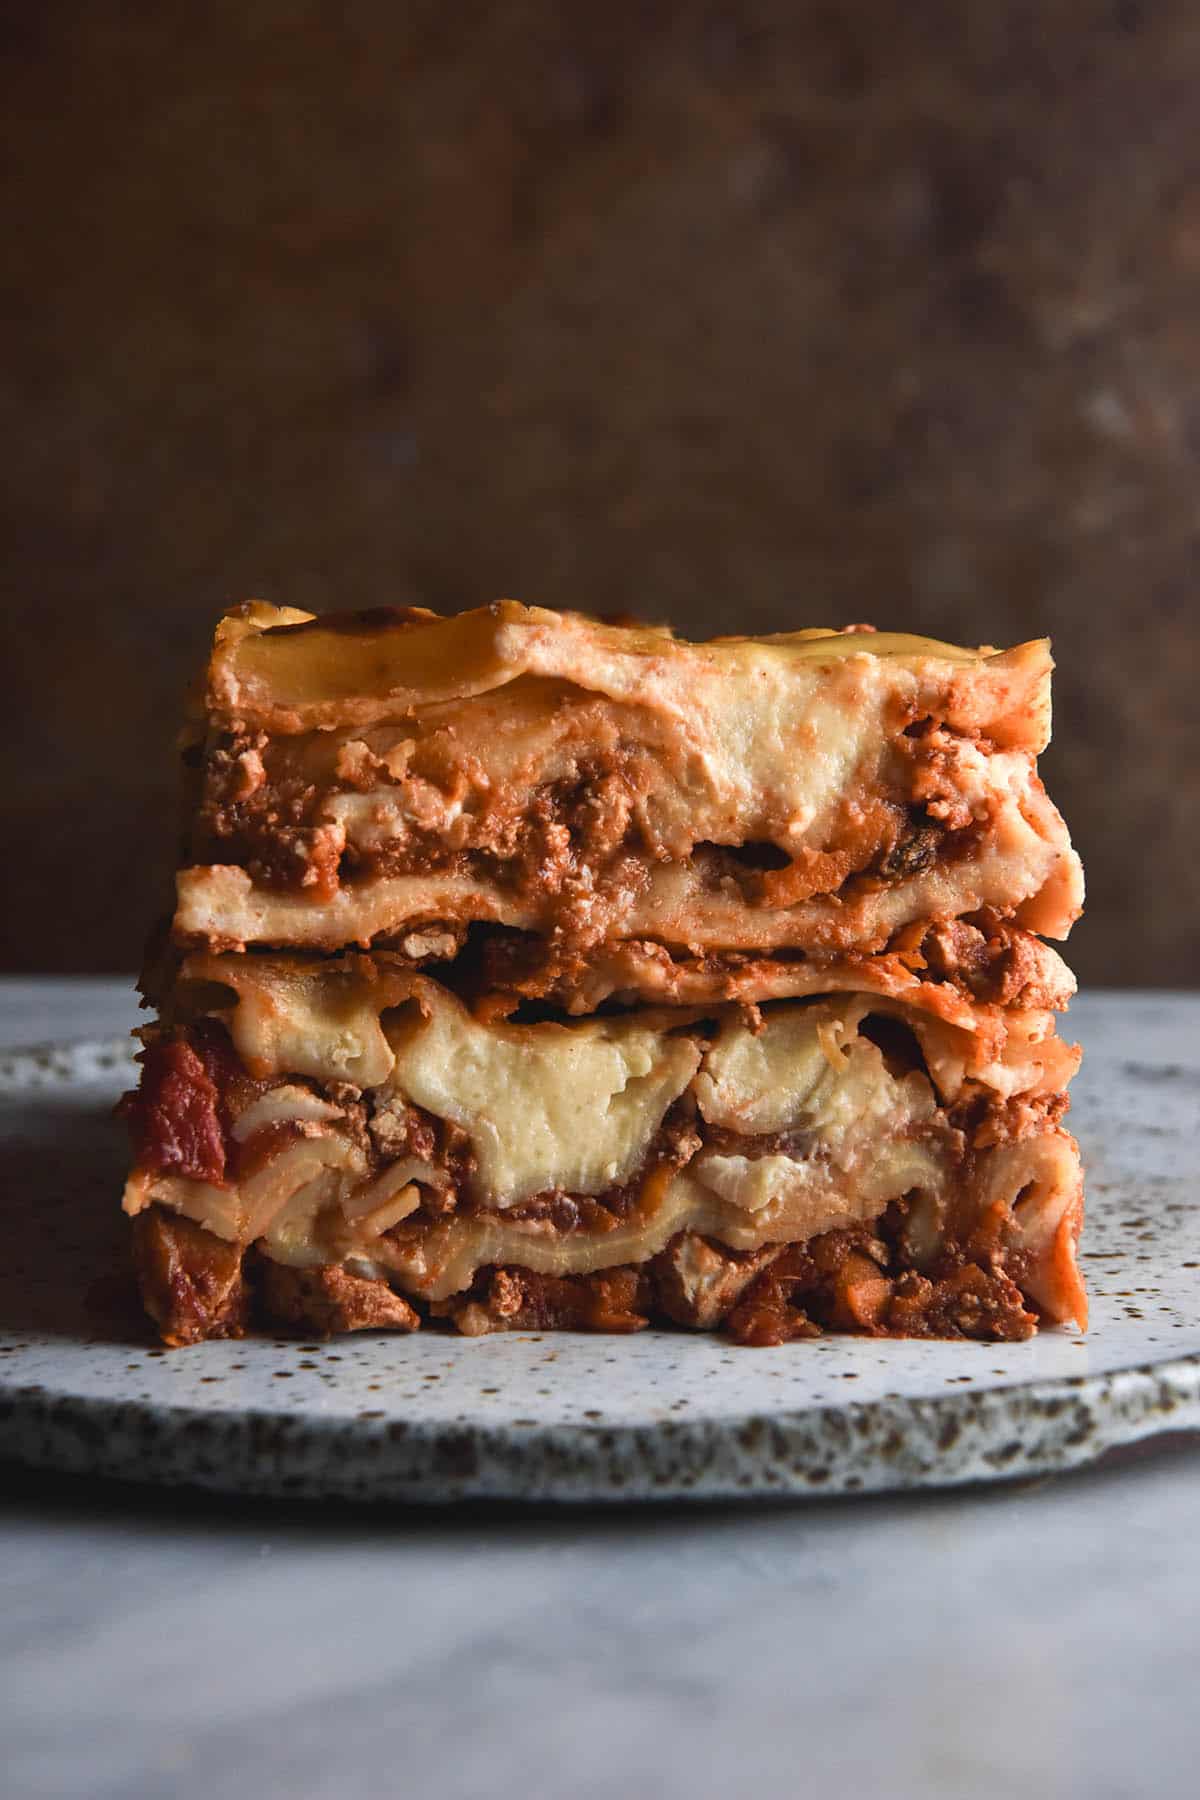 A side on image of a stack of gluten free vegan lasagne on a white speckled plate against a dark rust coloured backdrop